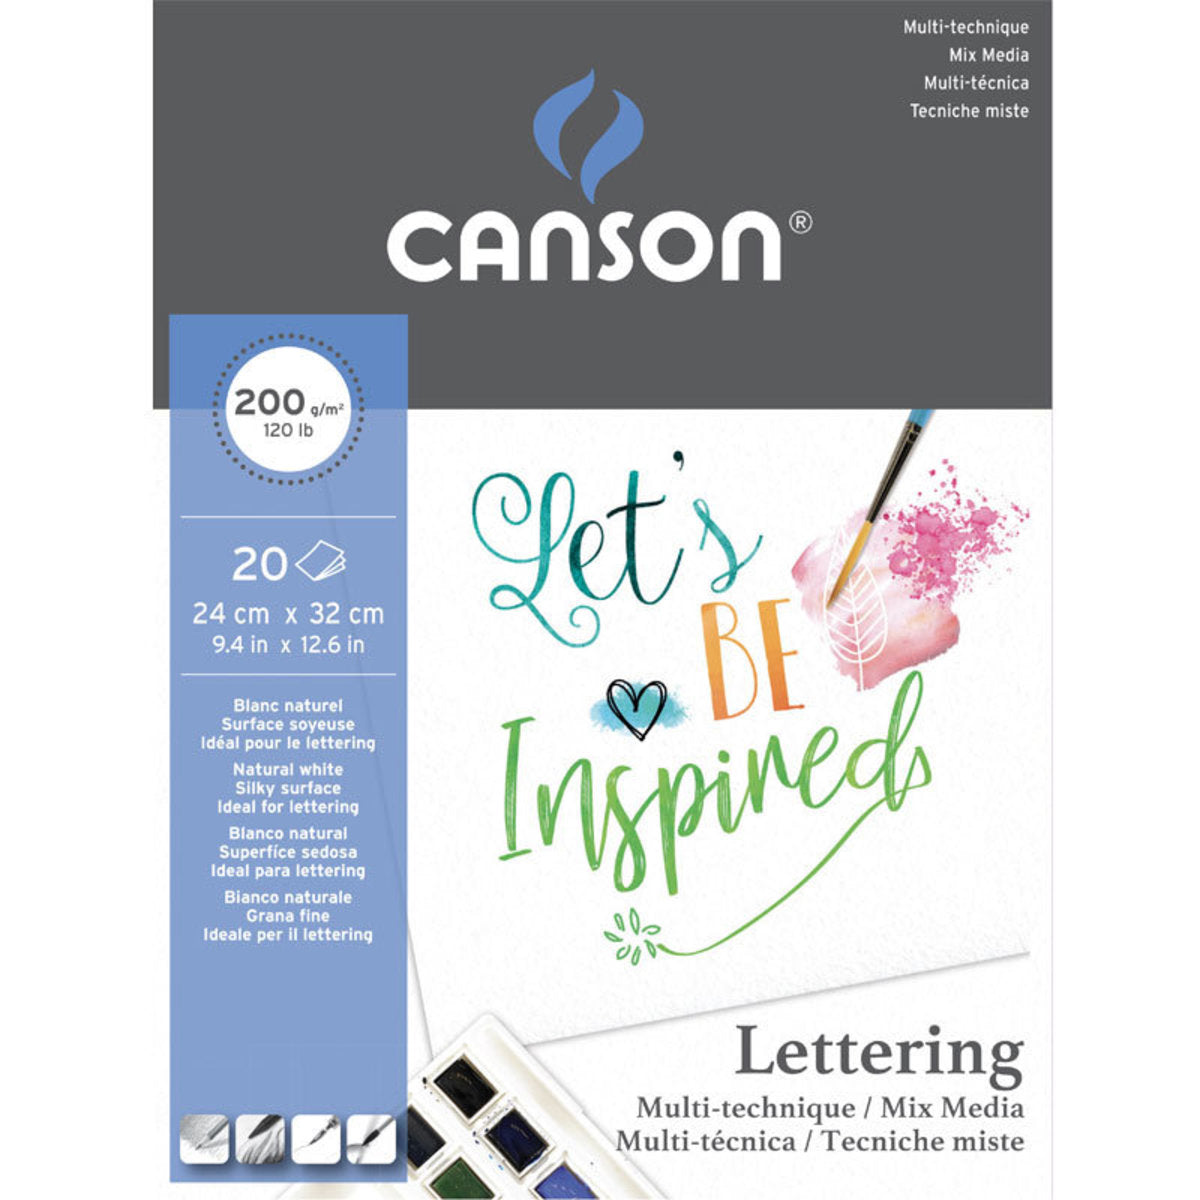 Canson Lettering Pad - Mix Media